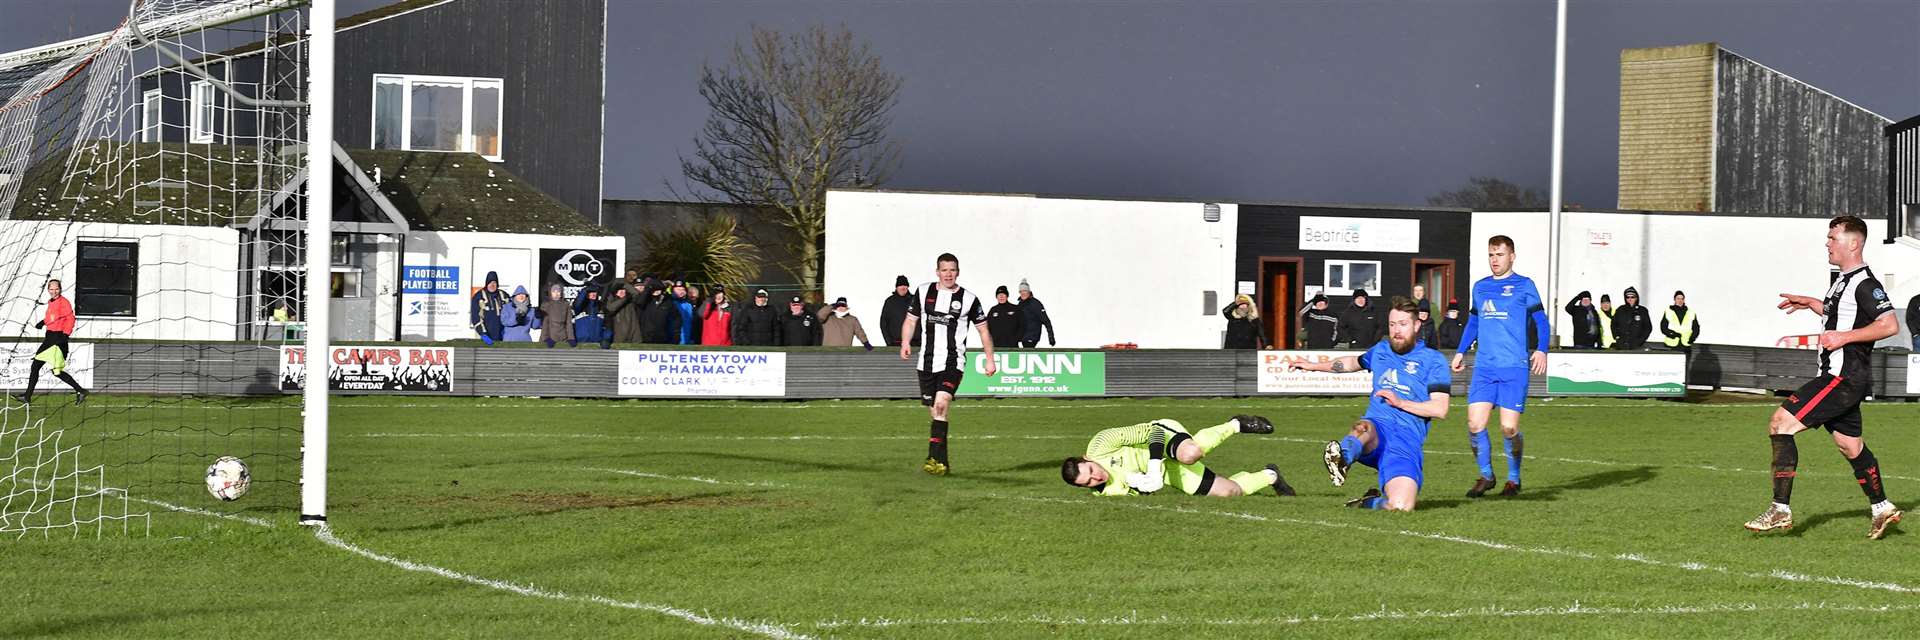 Gordon MacNab slots the ball into the net for Academy's winning goal against Strathspey Thistle at Harmsworth Park in March 2019 – the last time the teams faced each other. Picture: Mel Roger